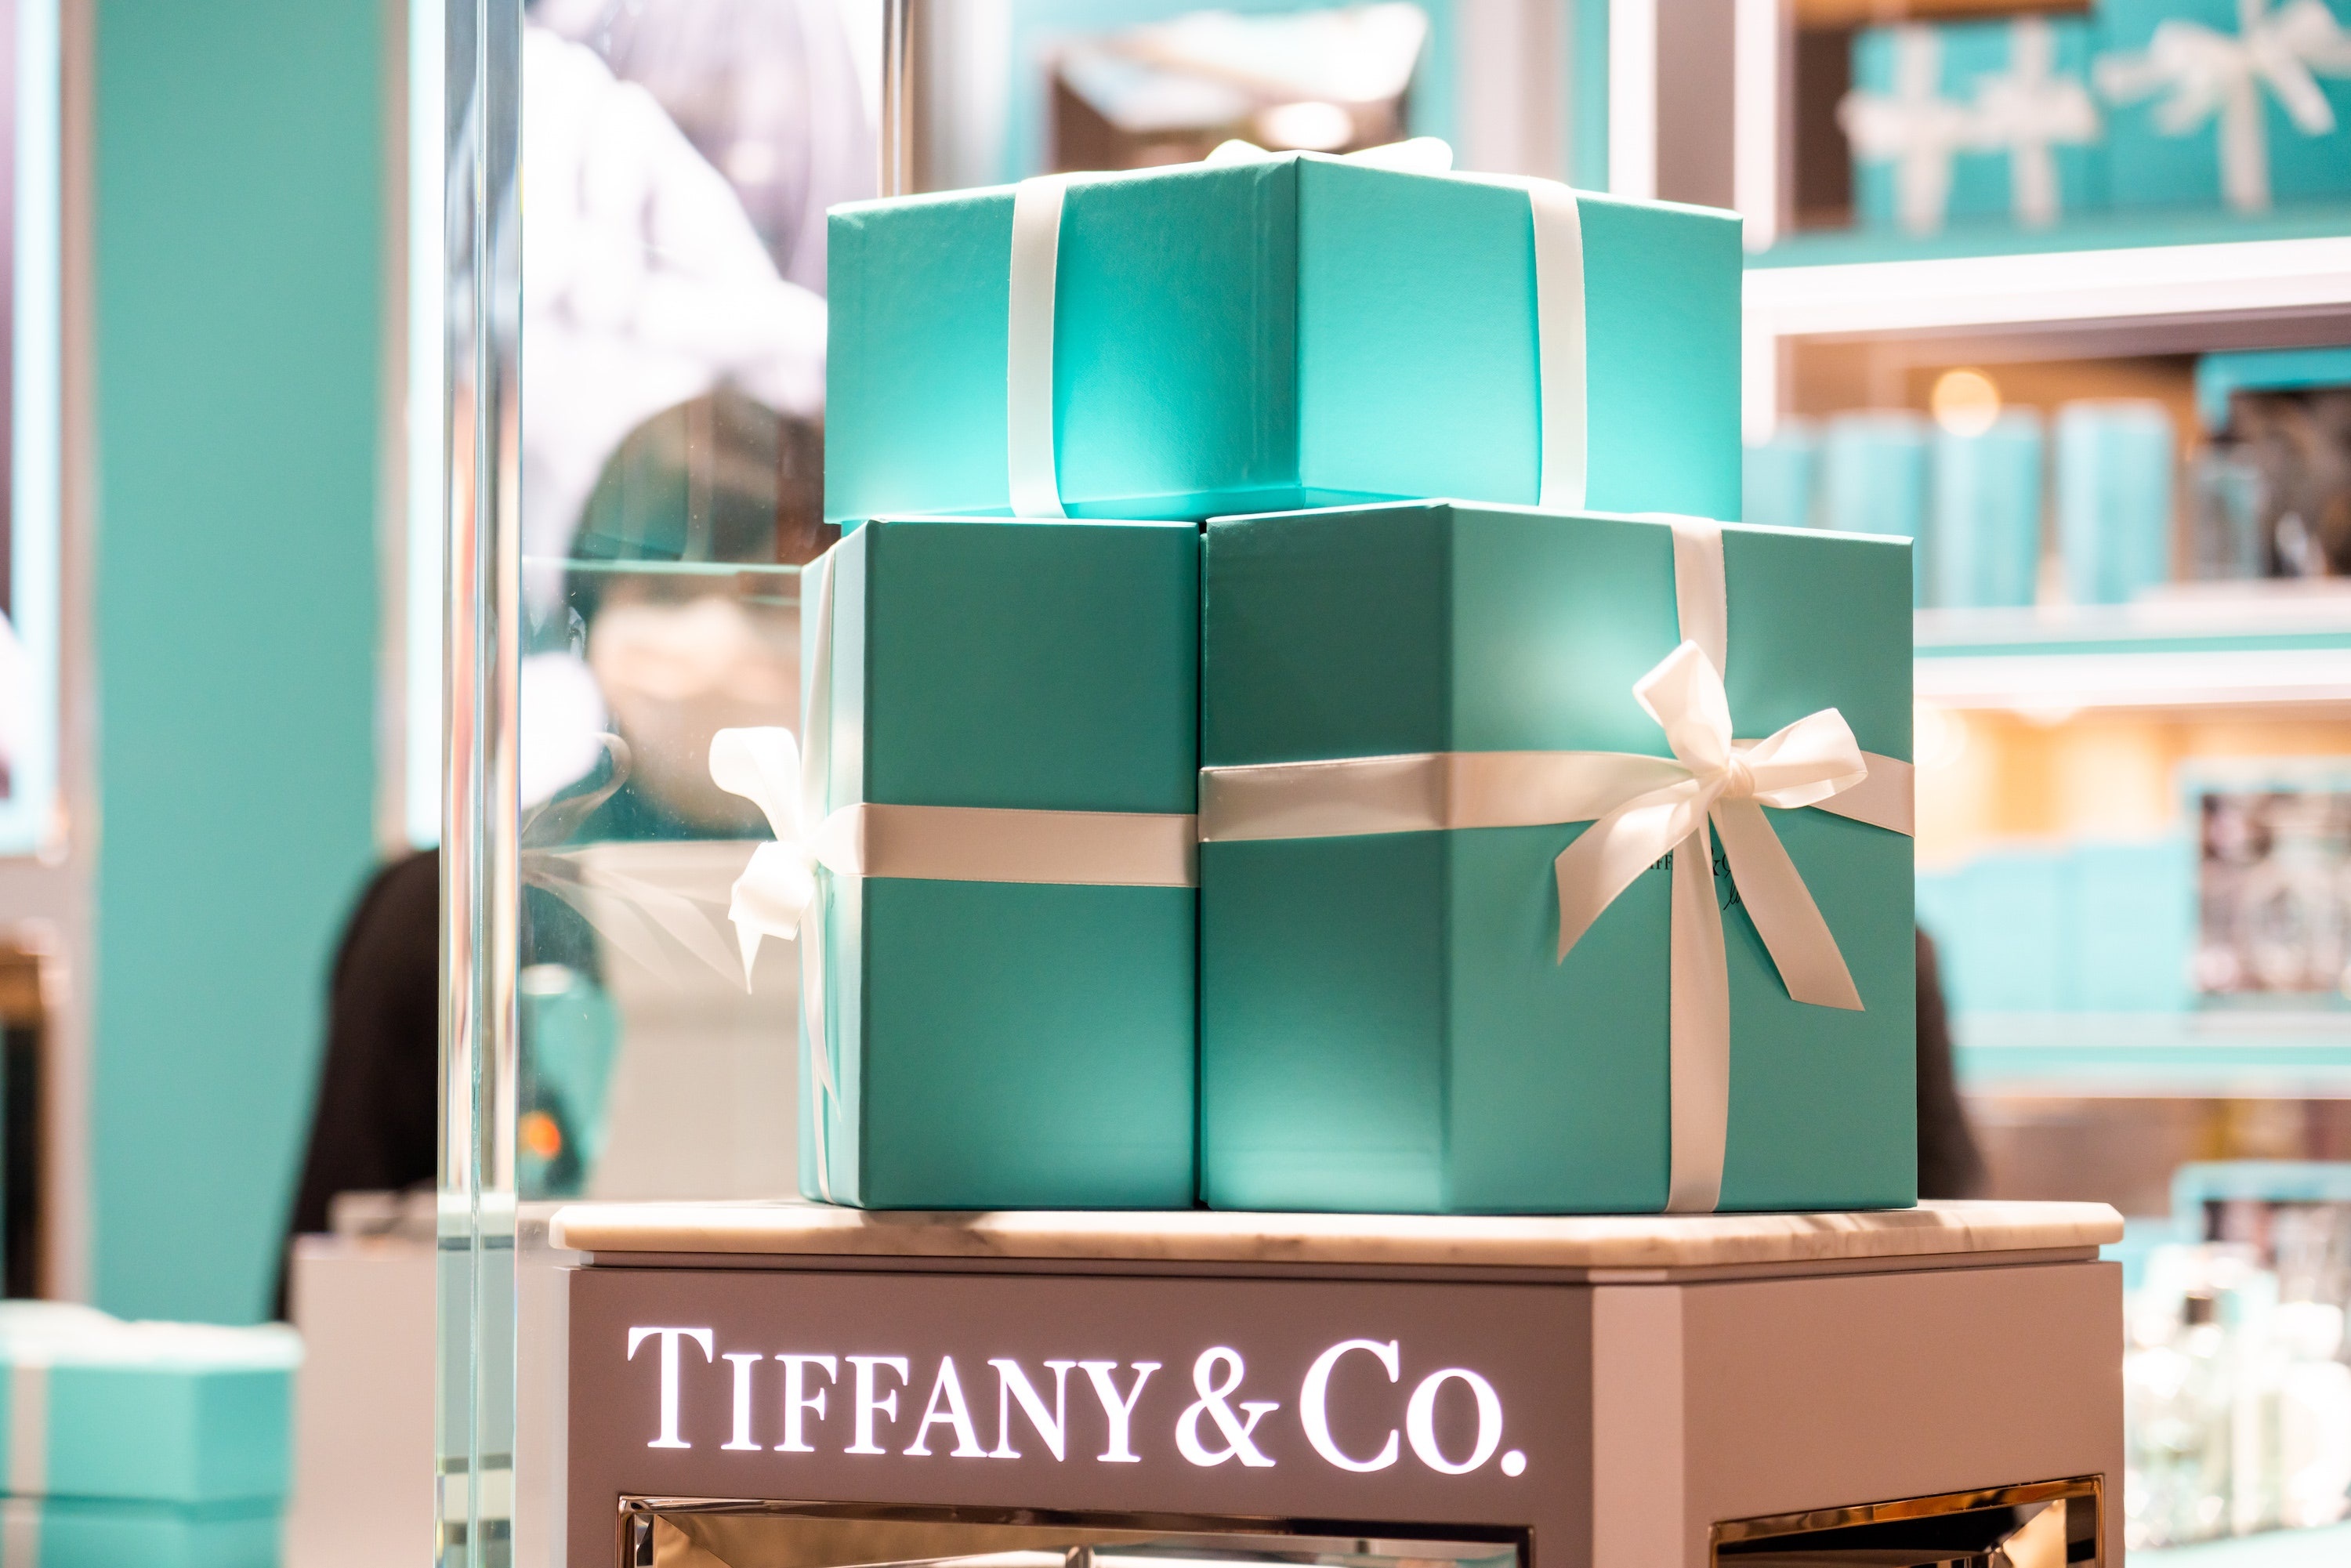 Tiffany & Co.: An American luxury jewelry, Headquartered in Fifth Avenue, New York City. 3000x2010 HD Background.